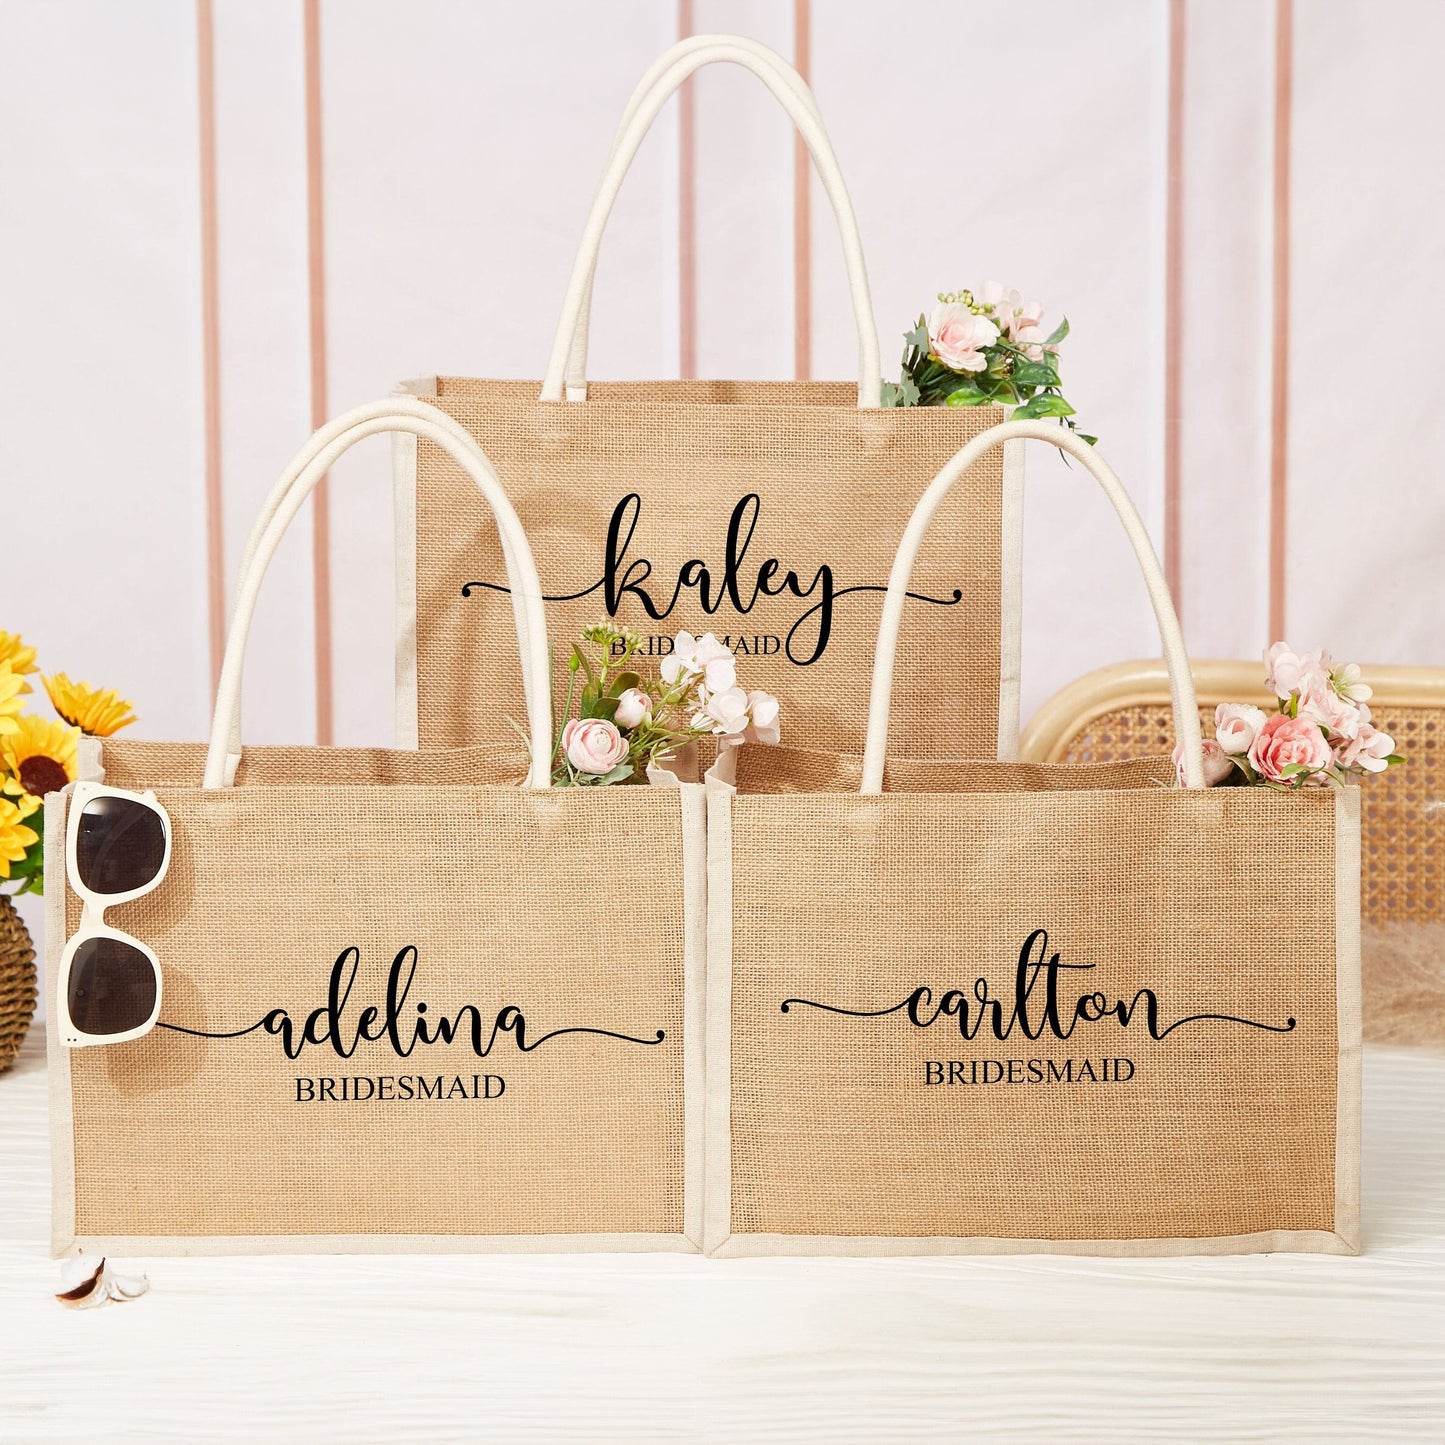 personalized-burlap-tote-bags-bridal-party-gifts_9